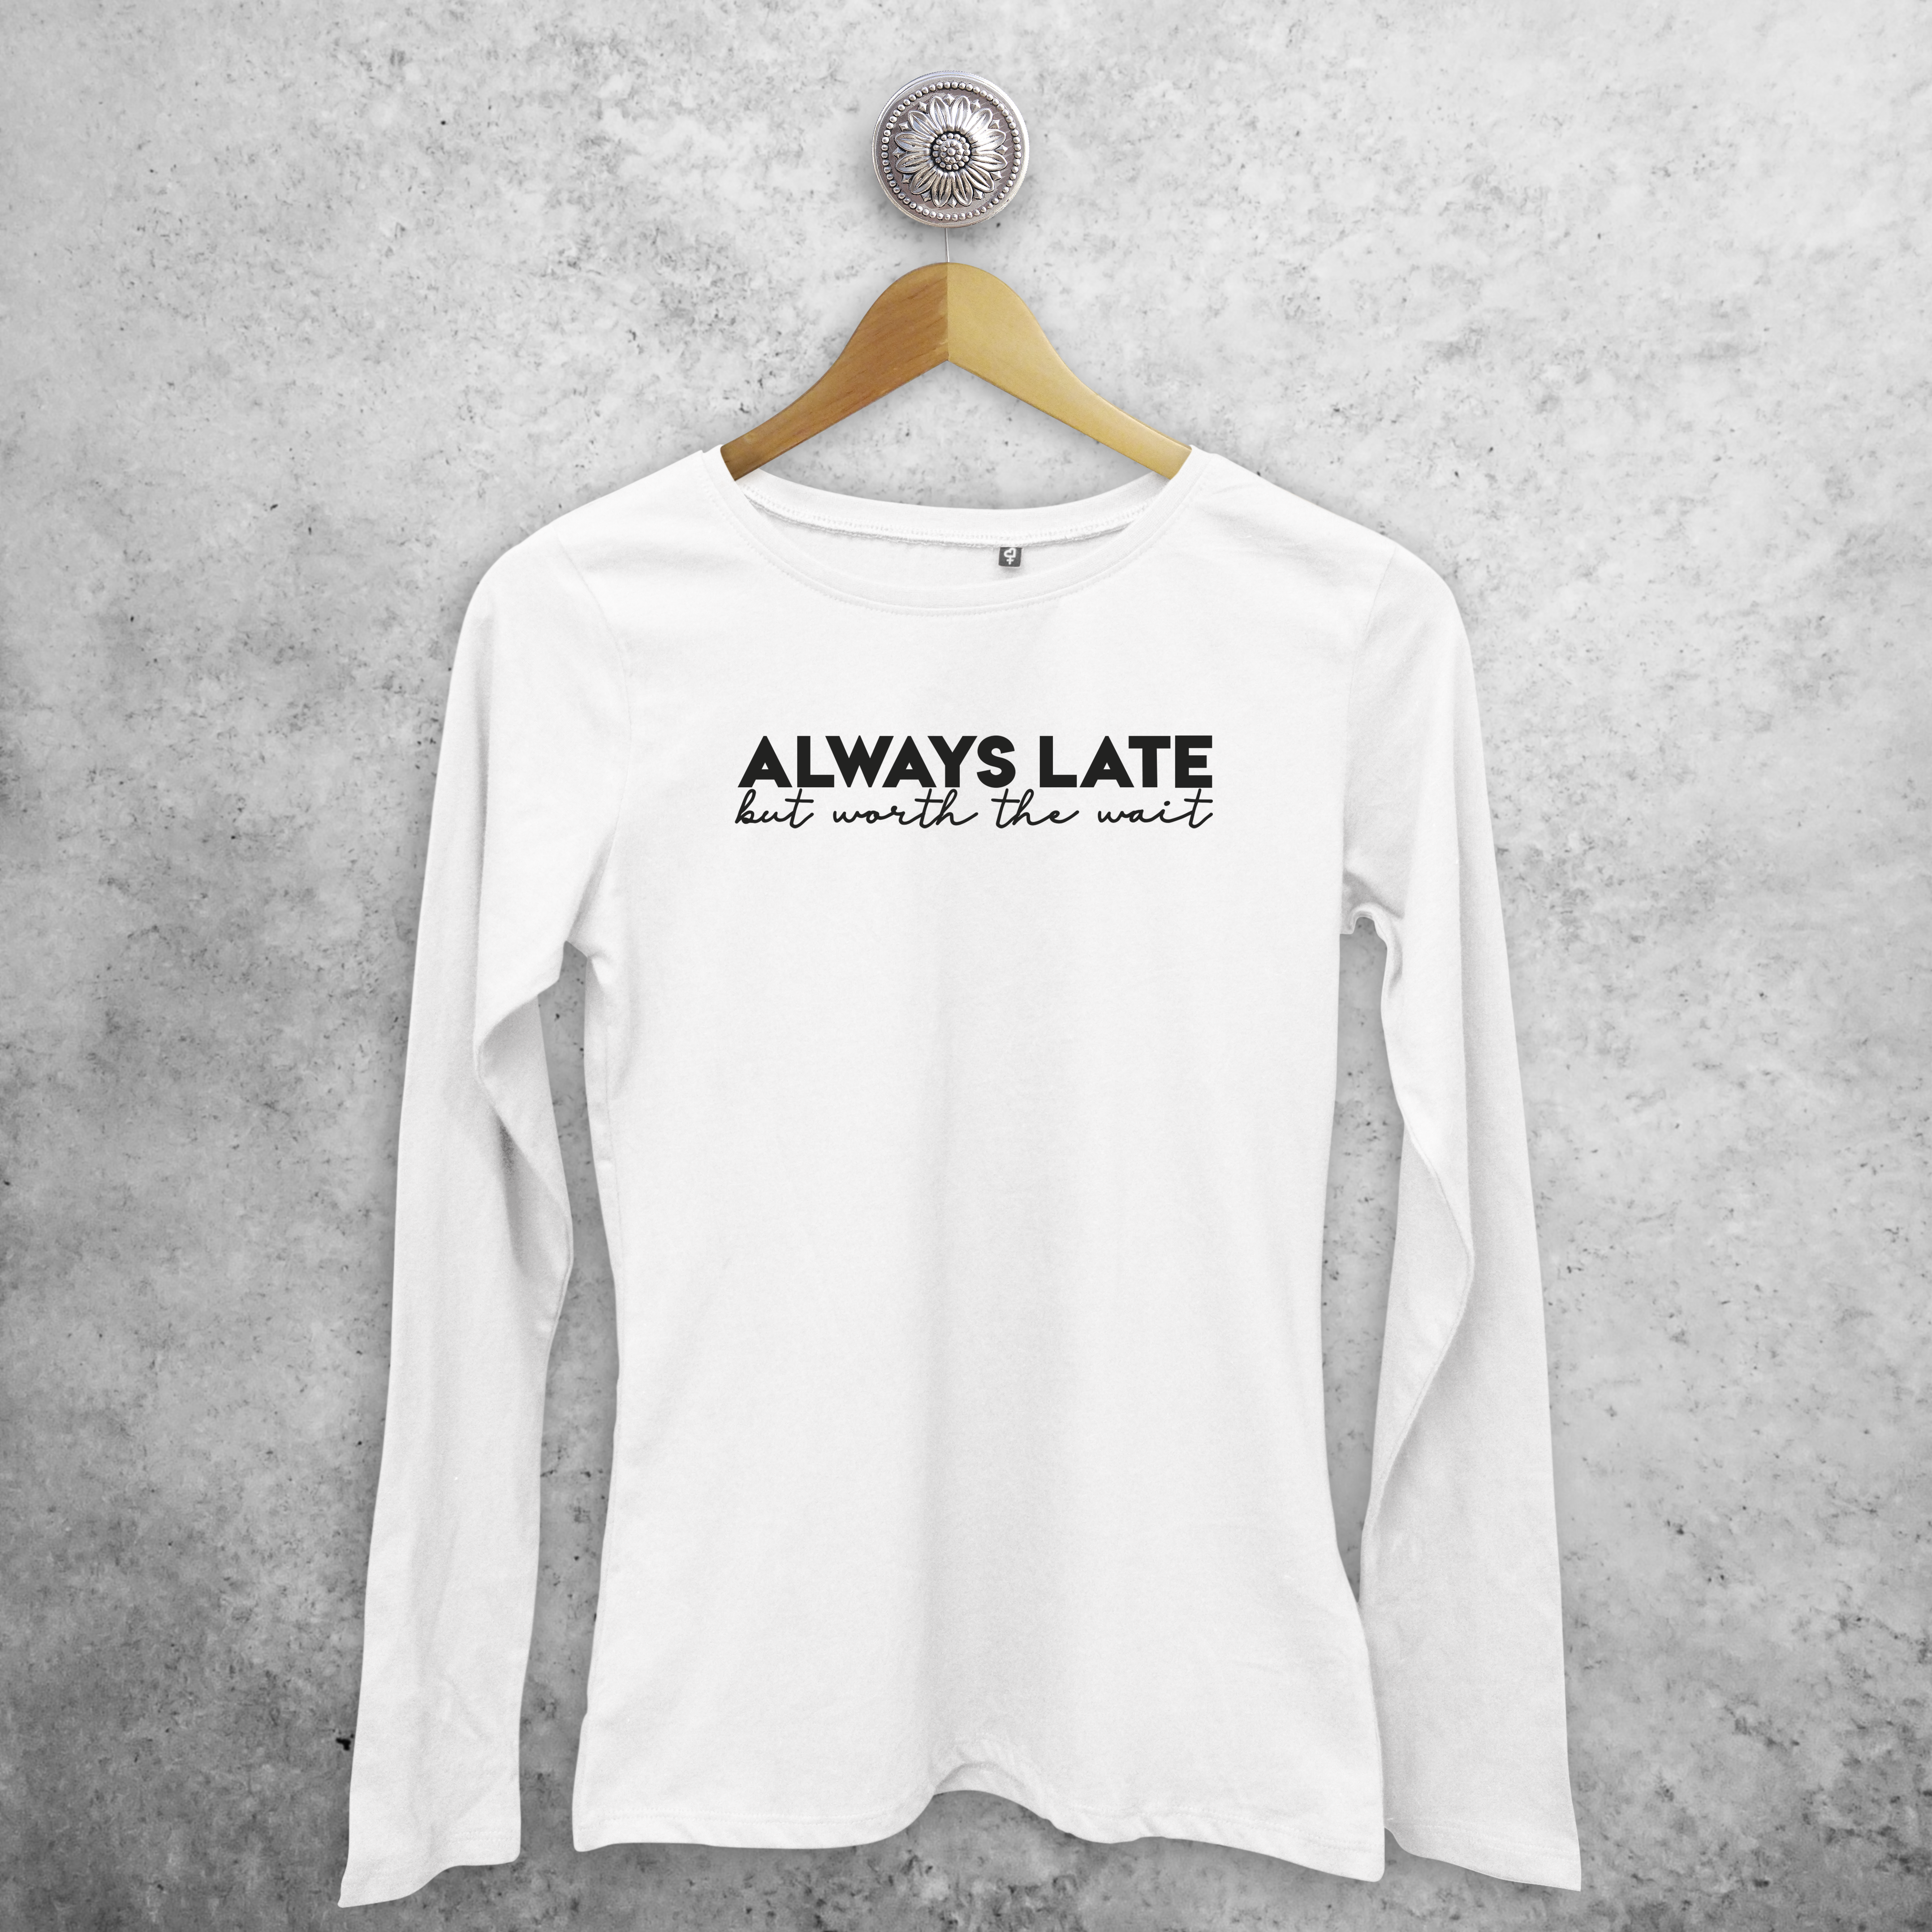 'Always late, but worth the wait' adult longsleeve shirt